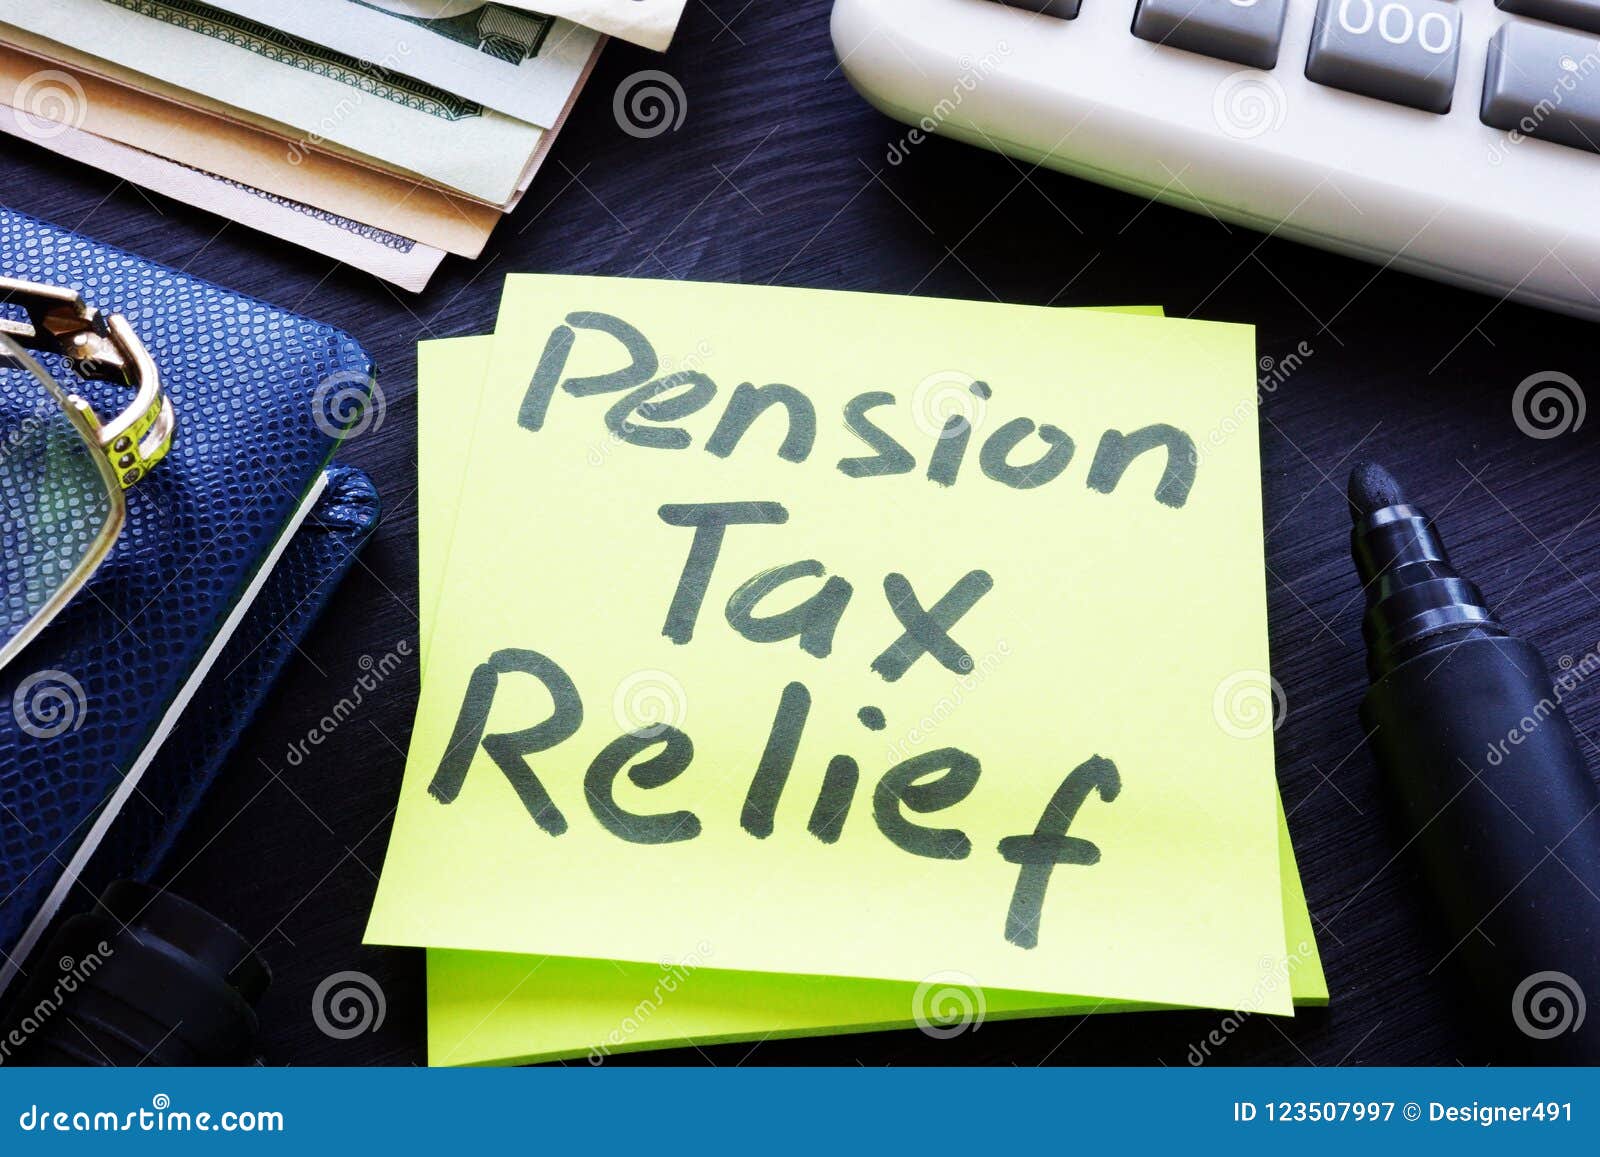 pension-tax-relief-written-on-a-stick-stock-image-image-of-memo